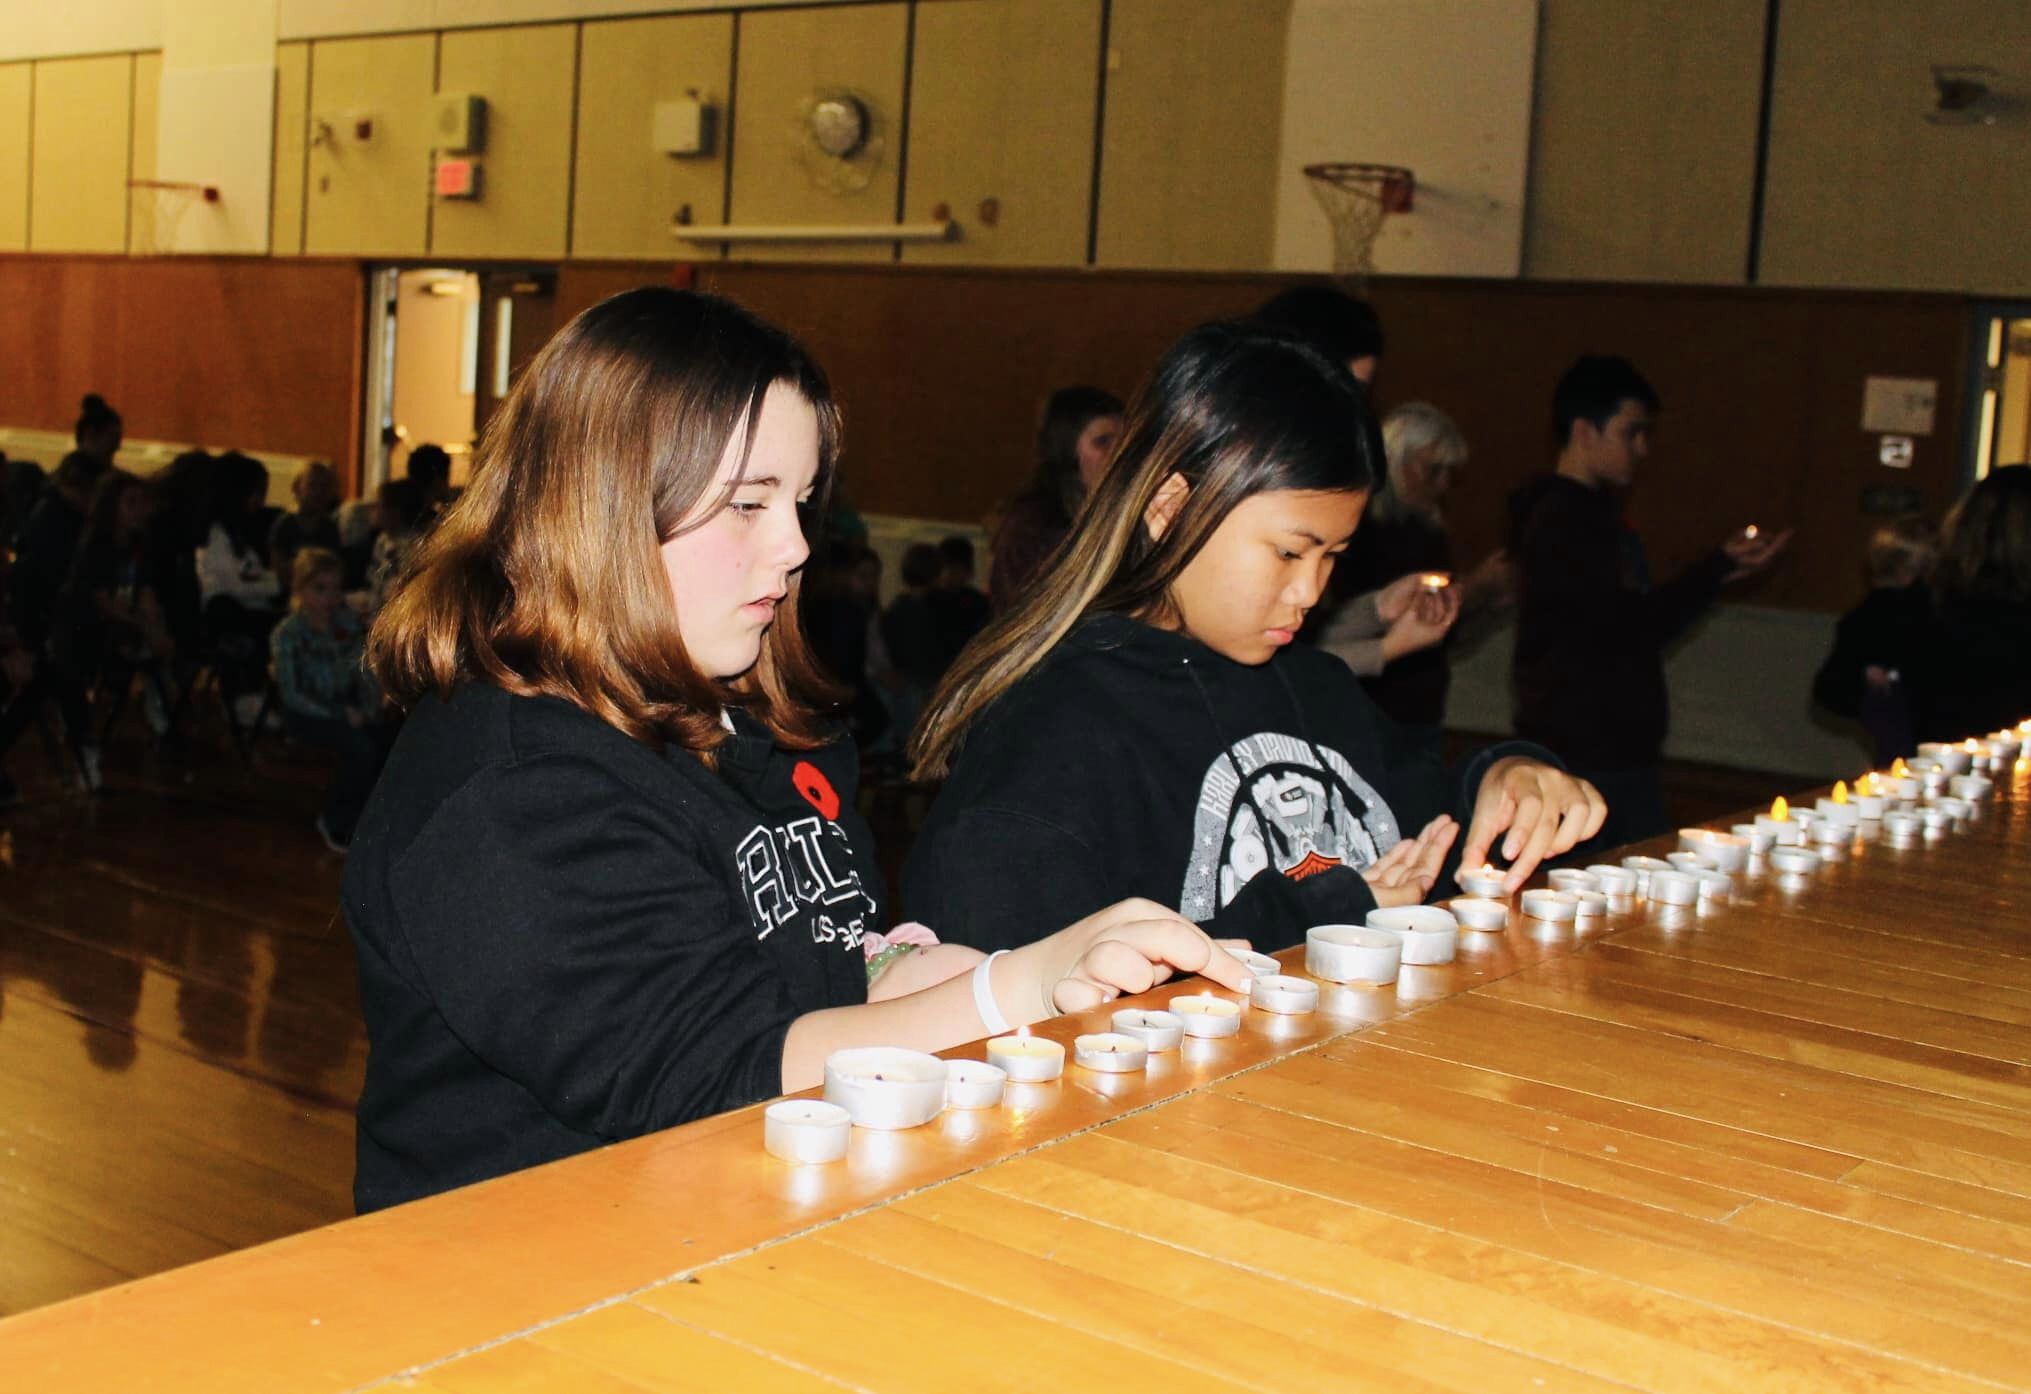 Students lighting candles